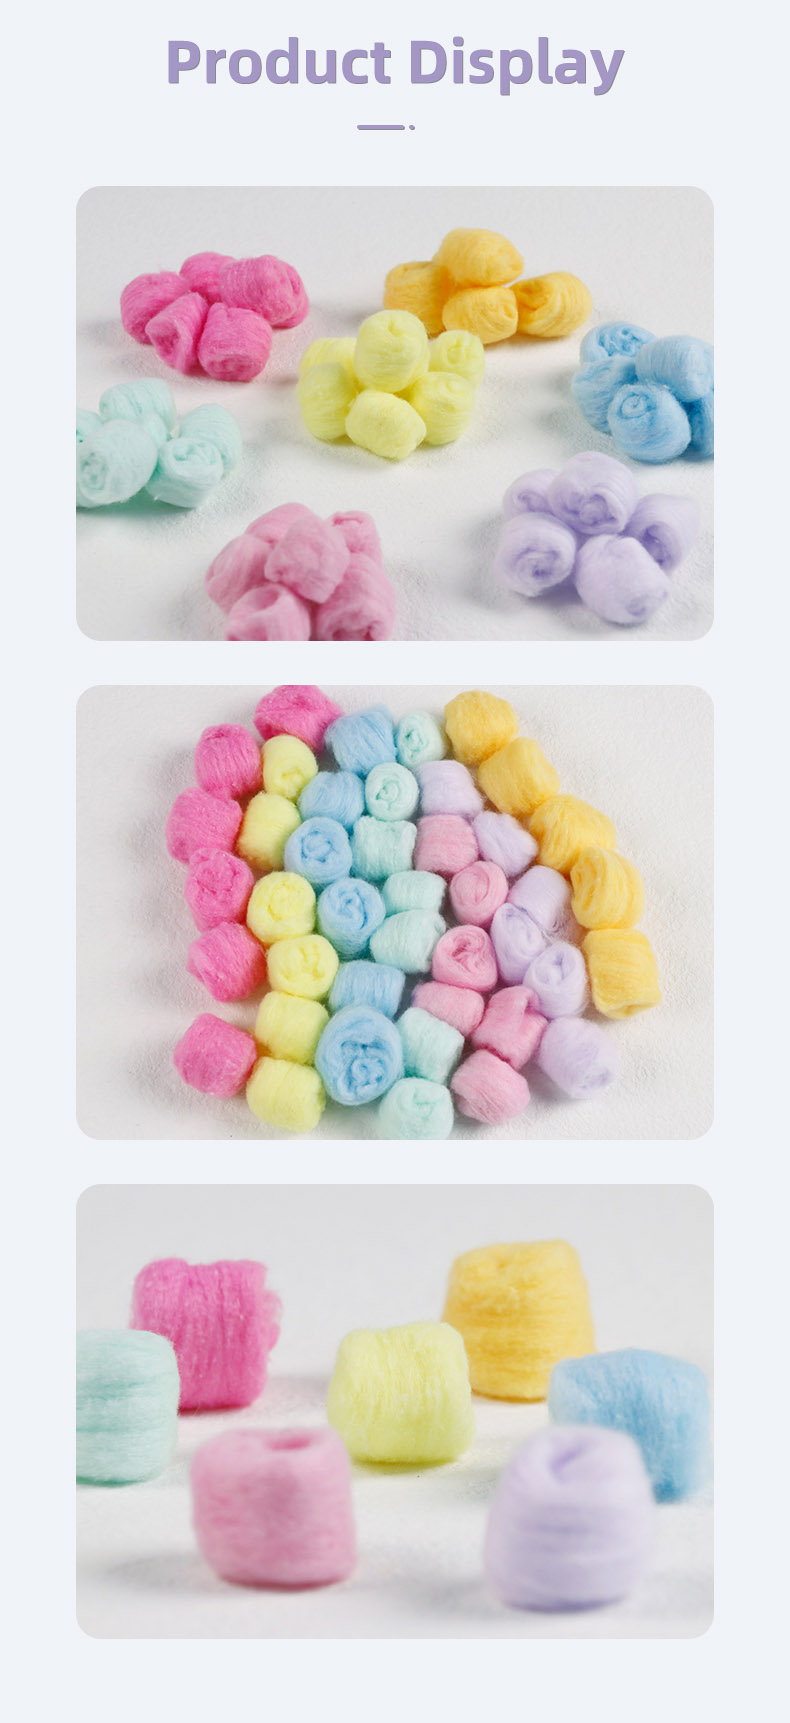 Household colored absorbent cotton balls